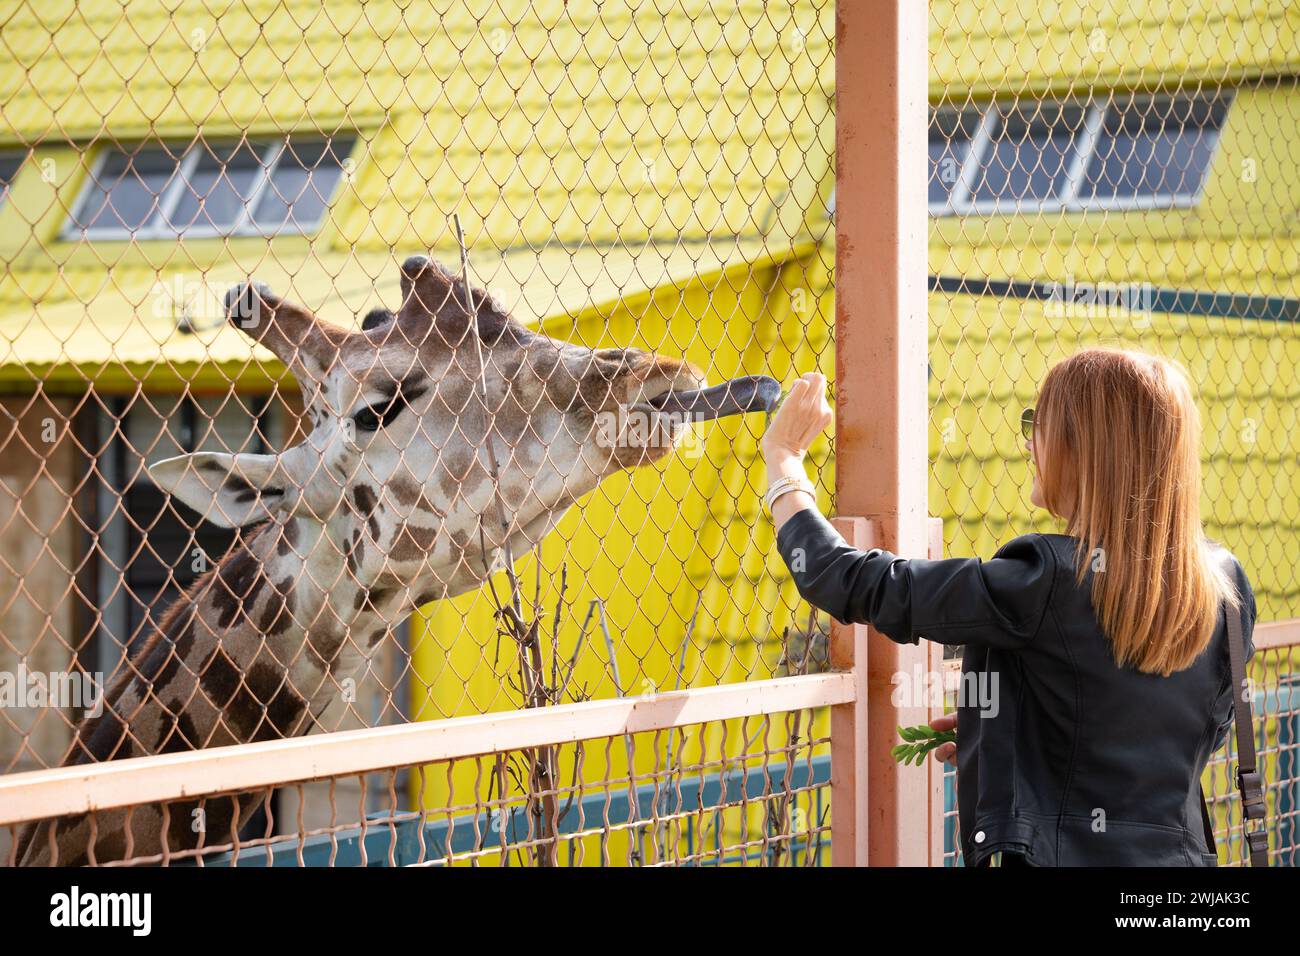 A giraffe at the zoo reaches out with its tongue towards a green leaf. A girl feeds a giraffe at the zoo. Stock Photo